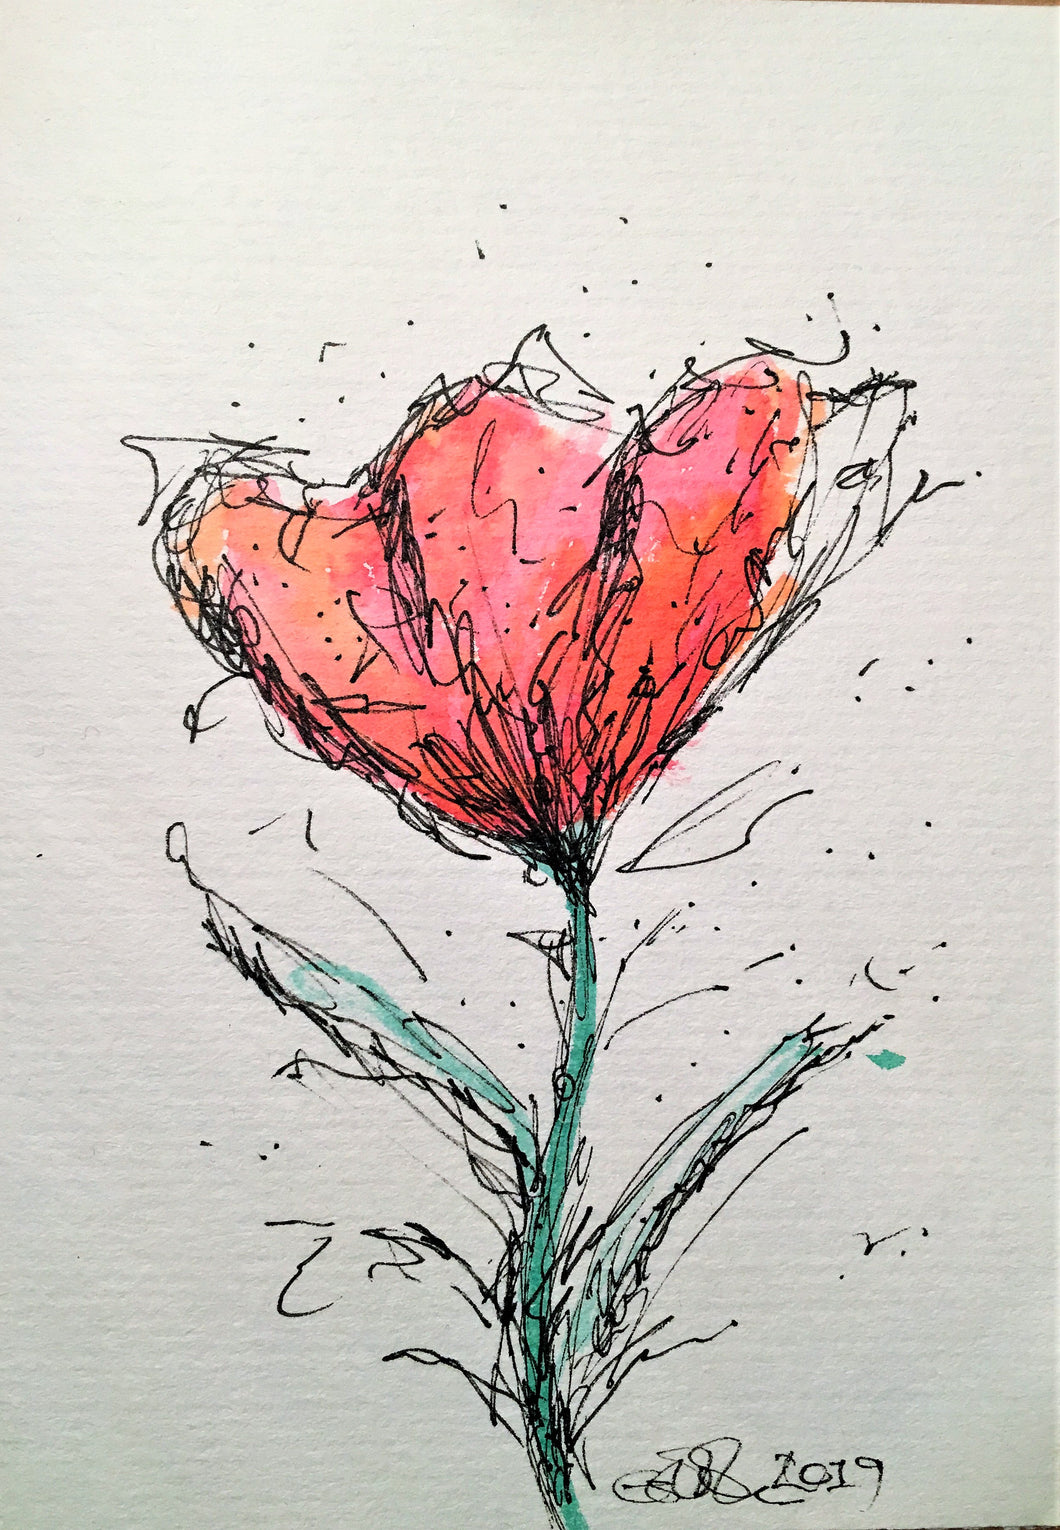 Handpainted Watercolour Greeting Card - Abstract Red/Orange Poppy Flower - eDgE dEsiGn London